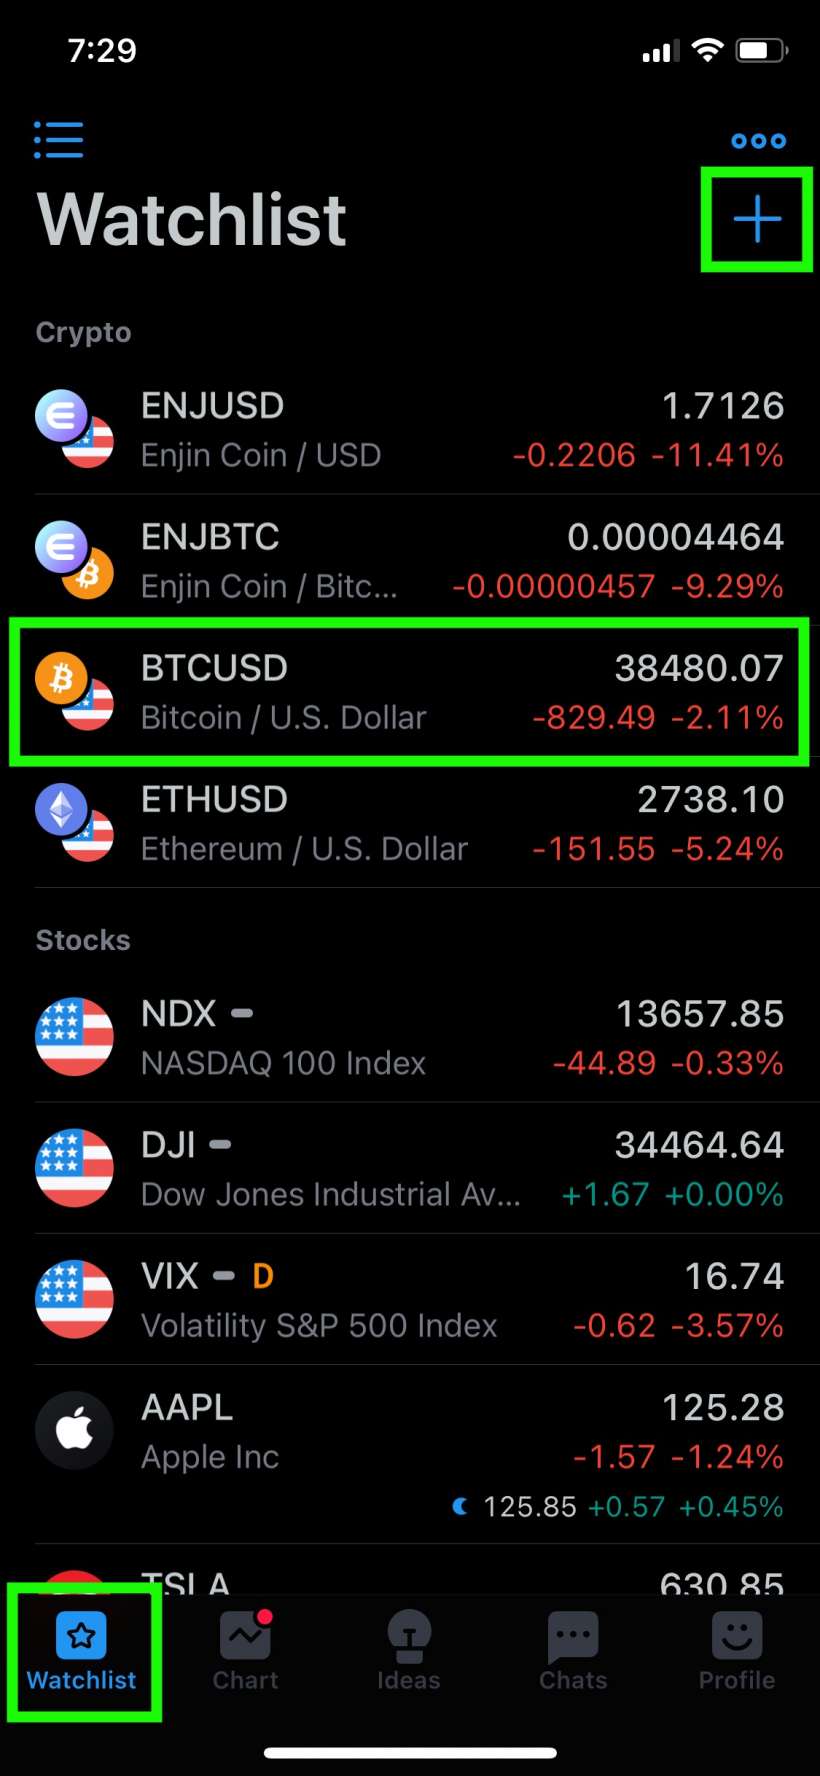 How to set price alerts for Bitcoin, Ethereum and other cryptocurrencies on iPhone and iPad.